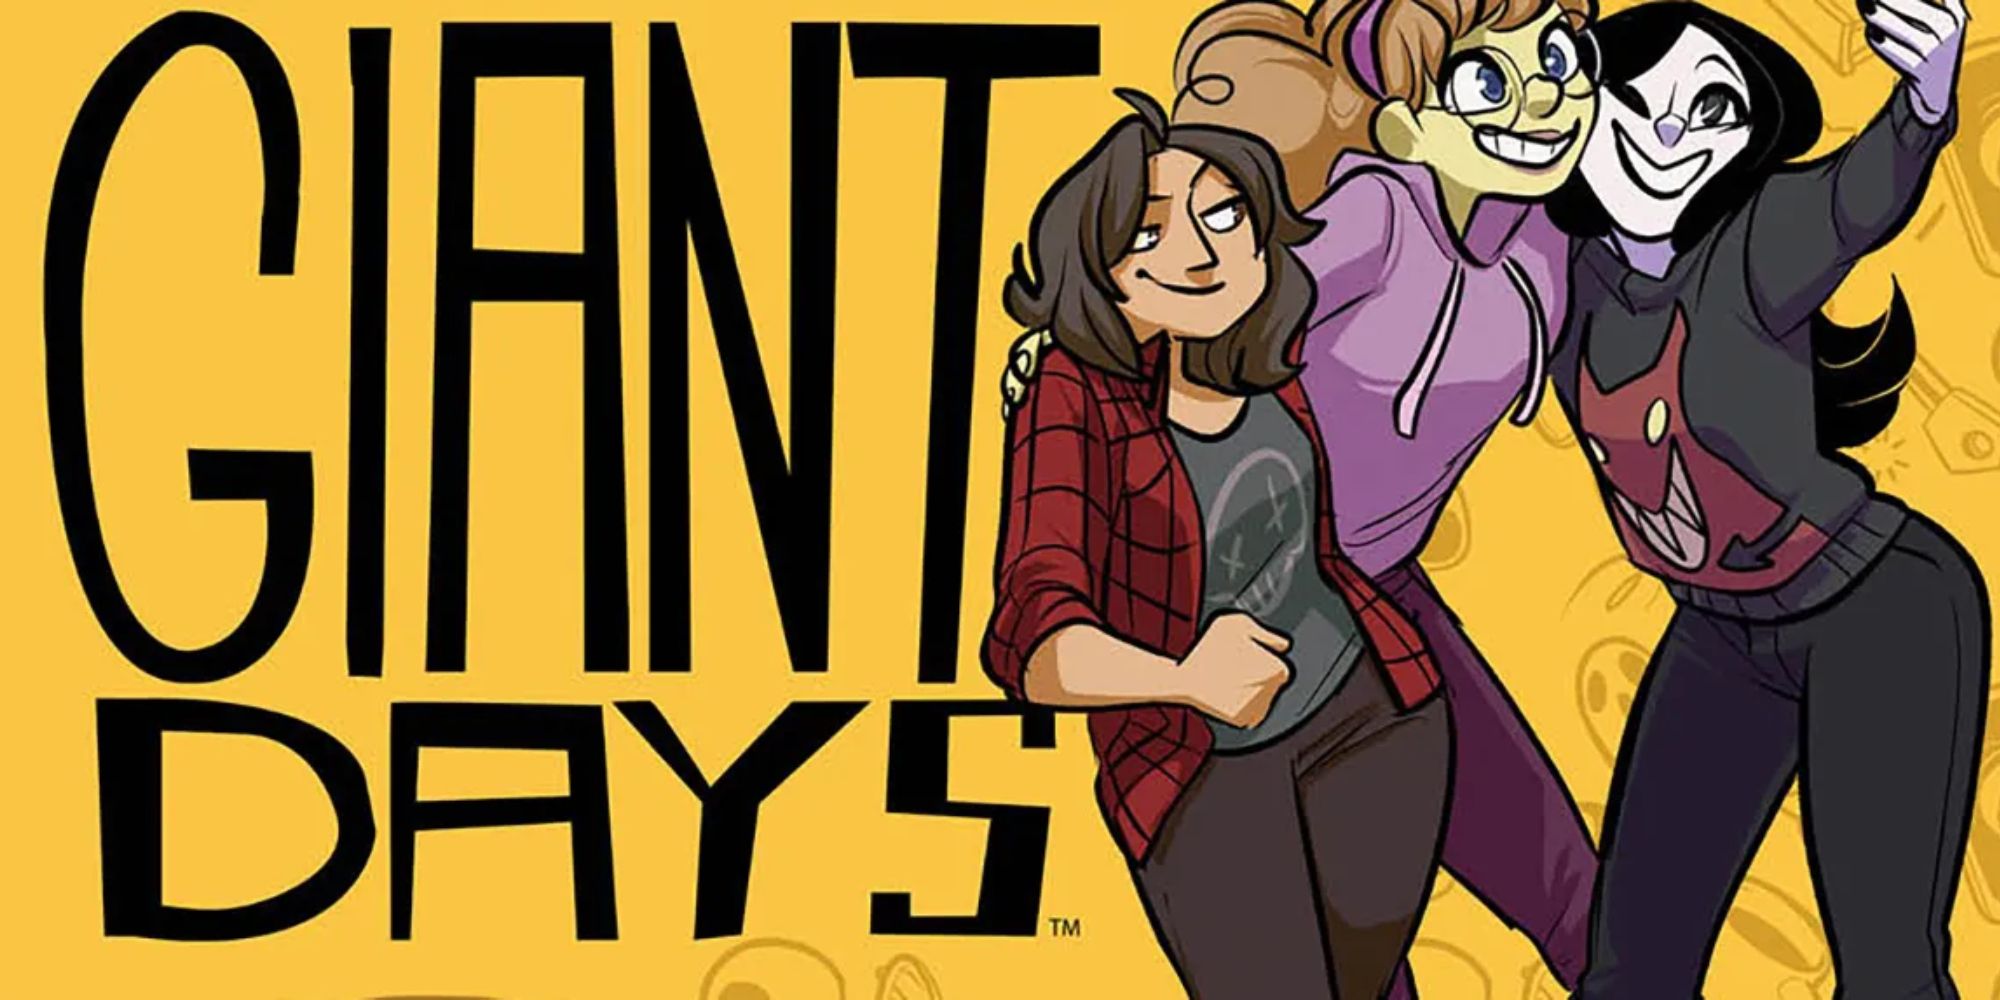 a promotional image for the comic book Giant Days featuring its protagonists Esther, Susan and Daisy taking a selfie next to the series' logo on the left